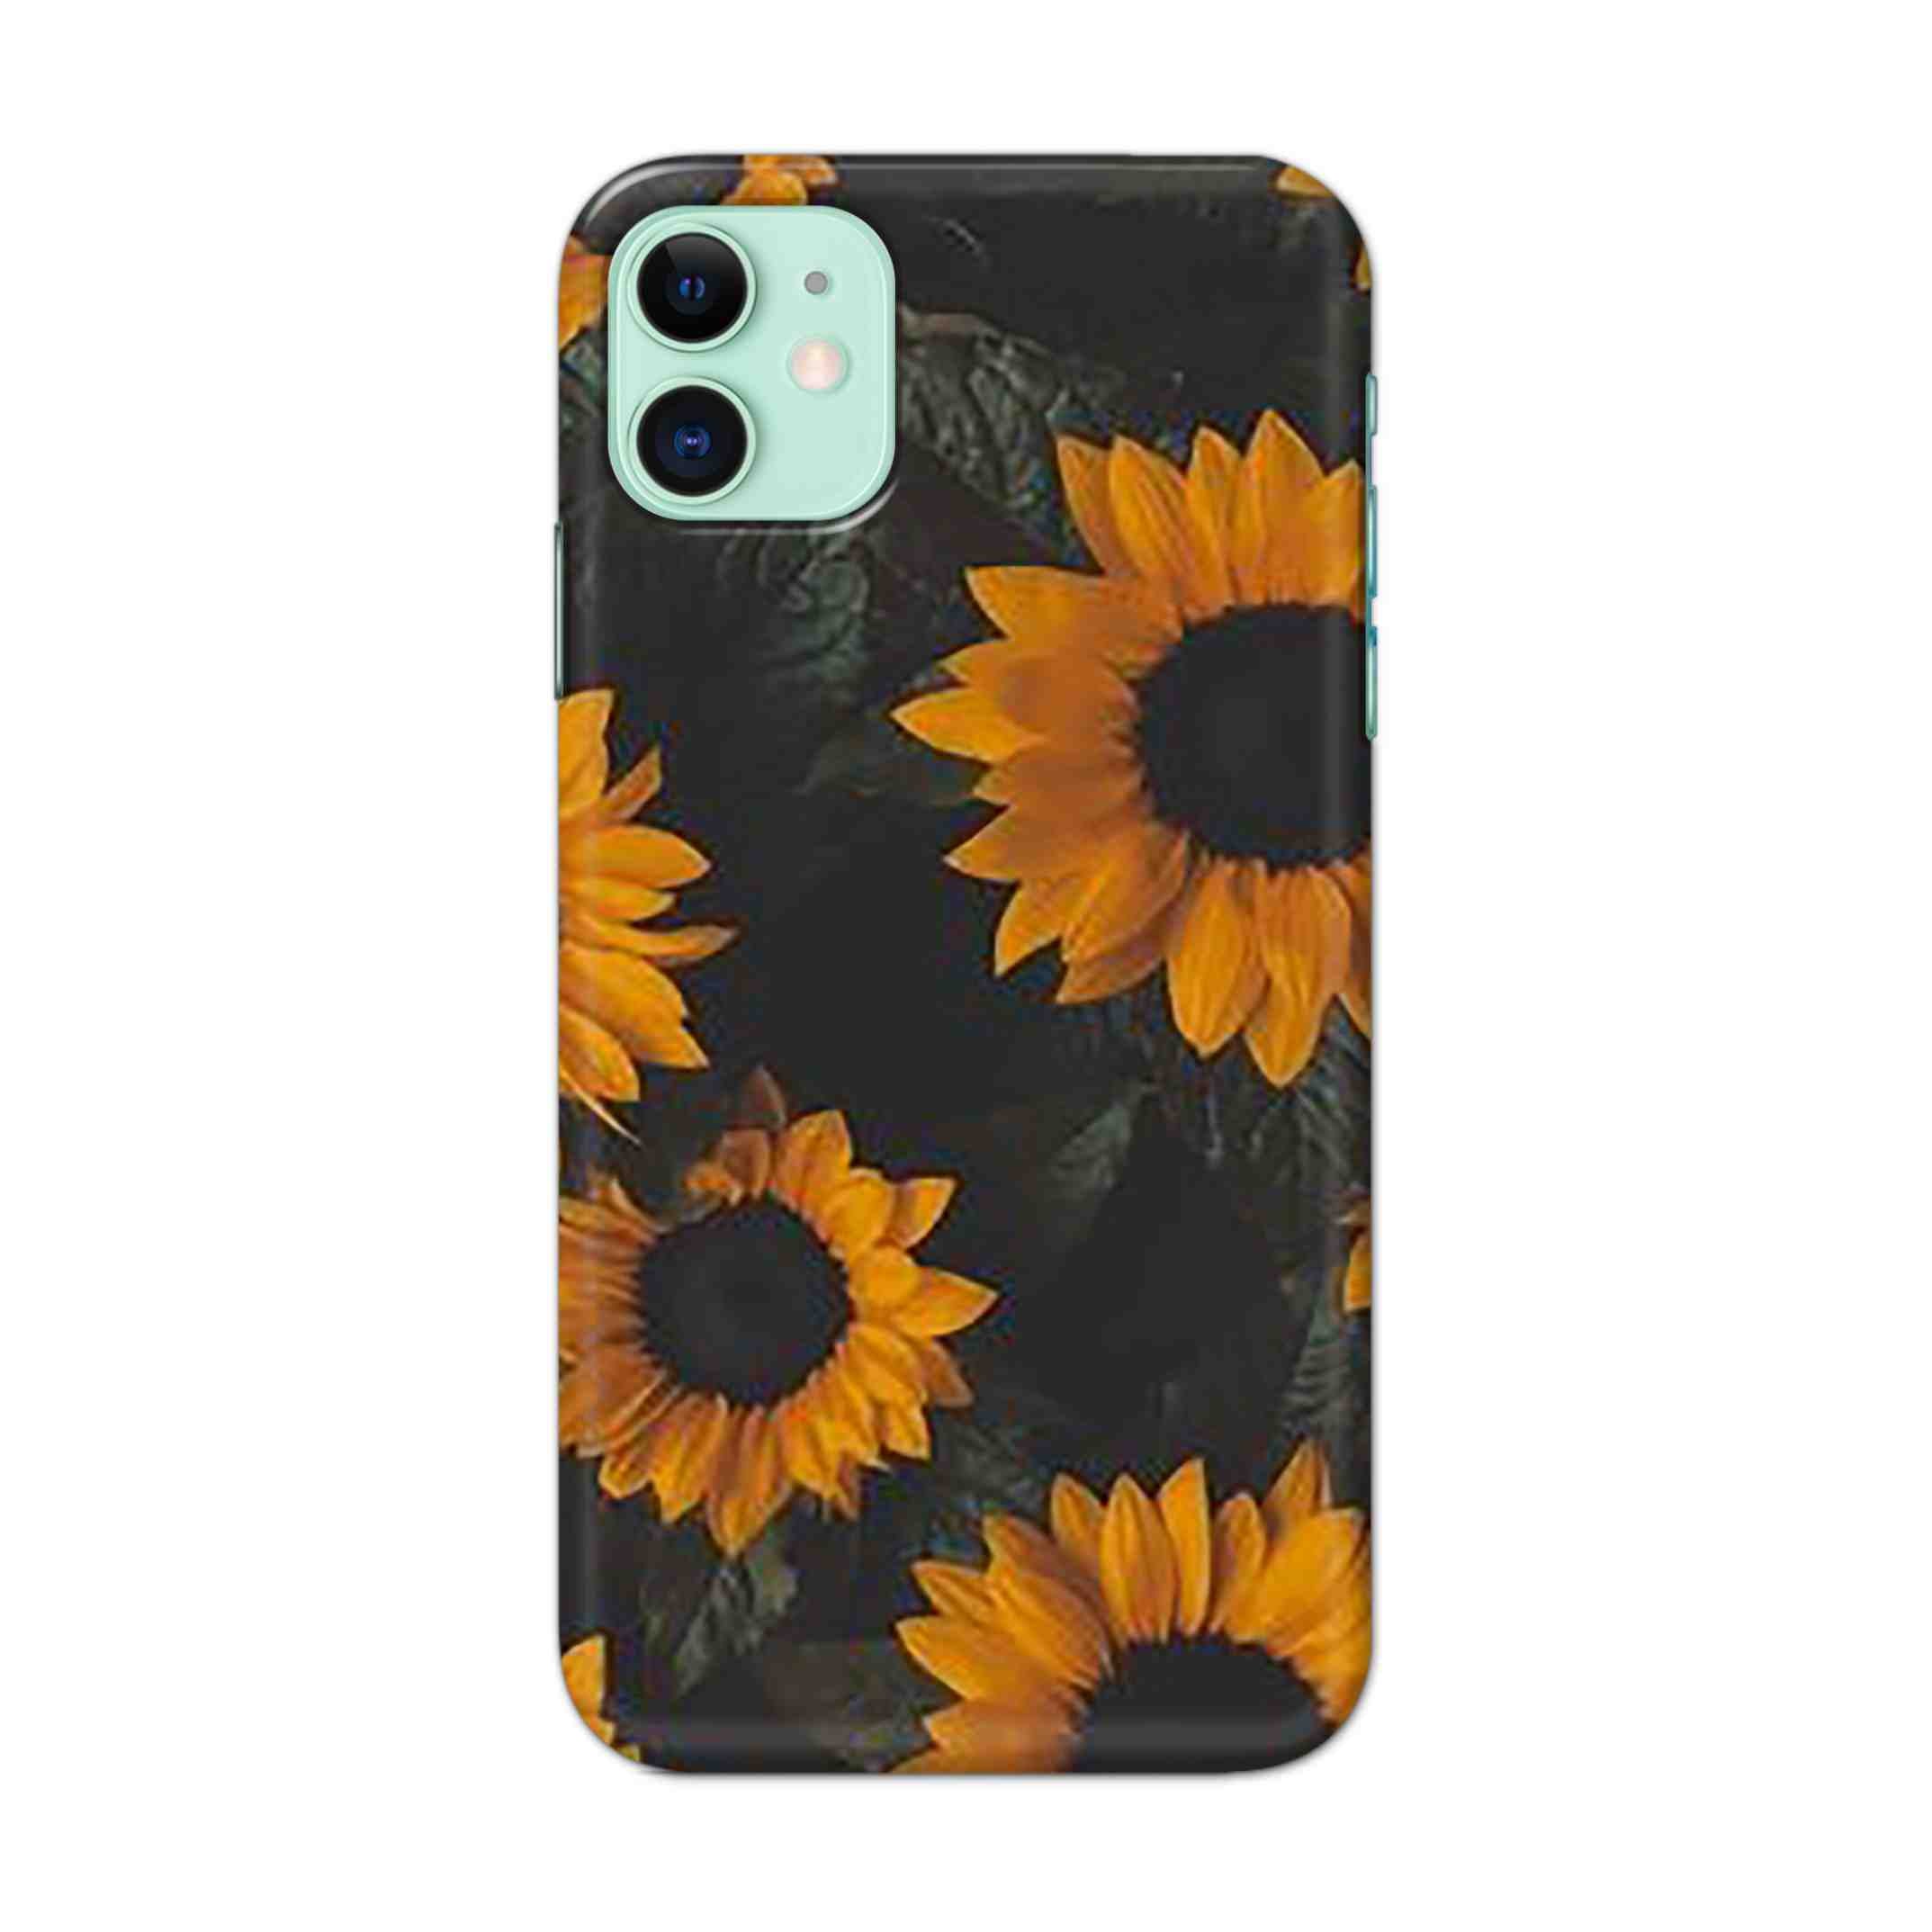 Buy Yellow Sunflower Hard Back Mobile Phone Case Cover For iPhone 11 Online